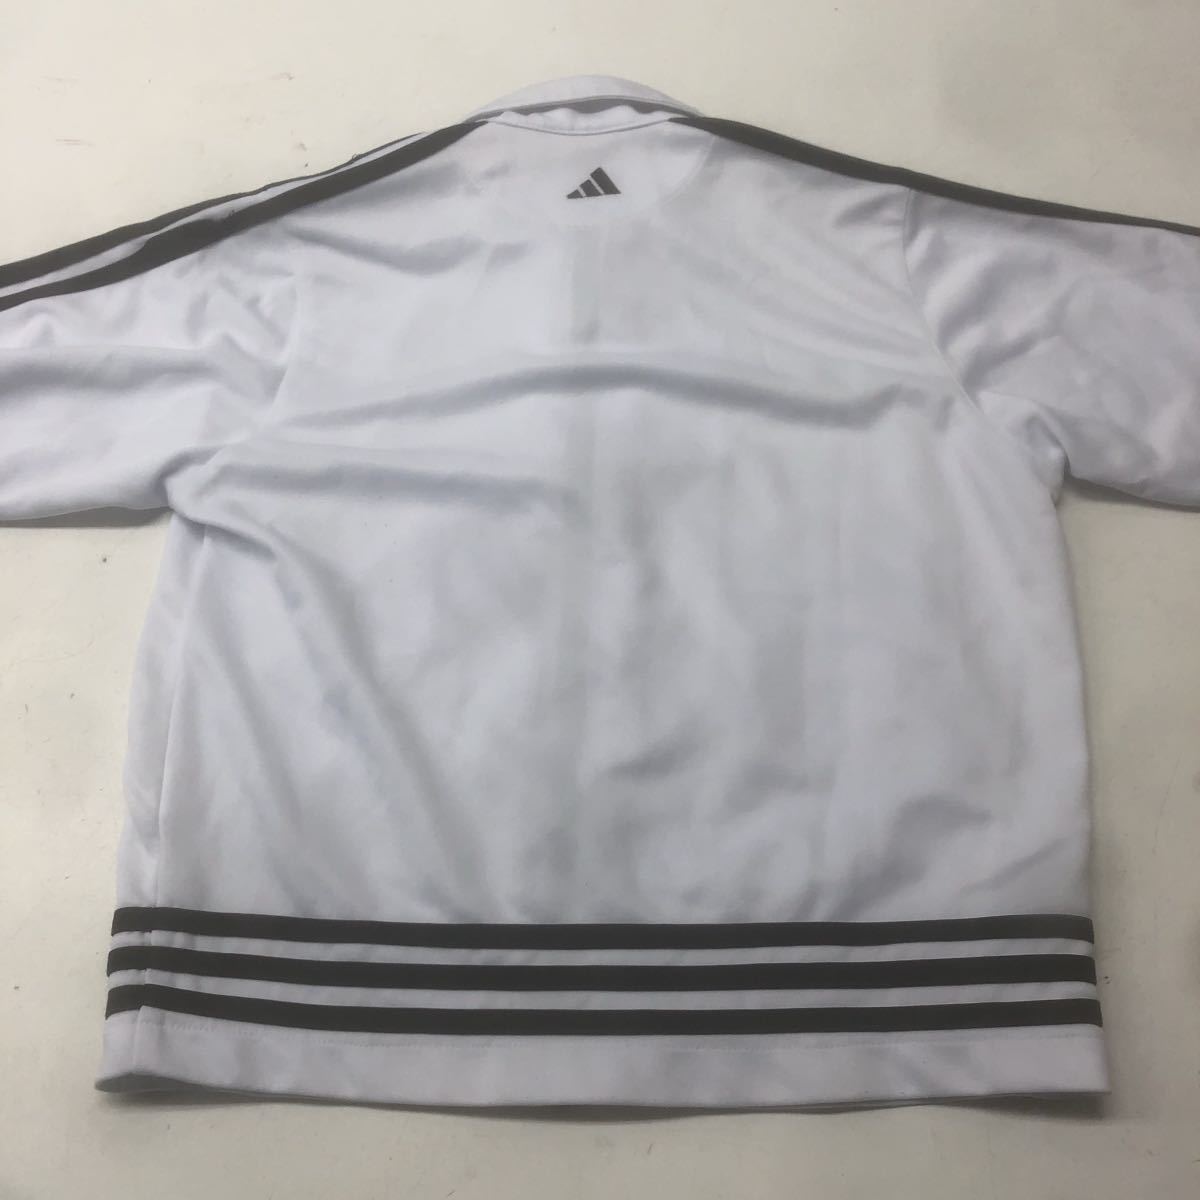  free shipping *adidas* Kids * jersey * Parker *145.#11101scc